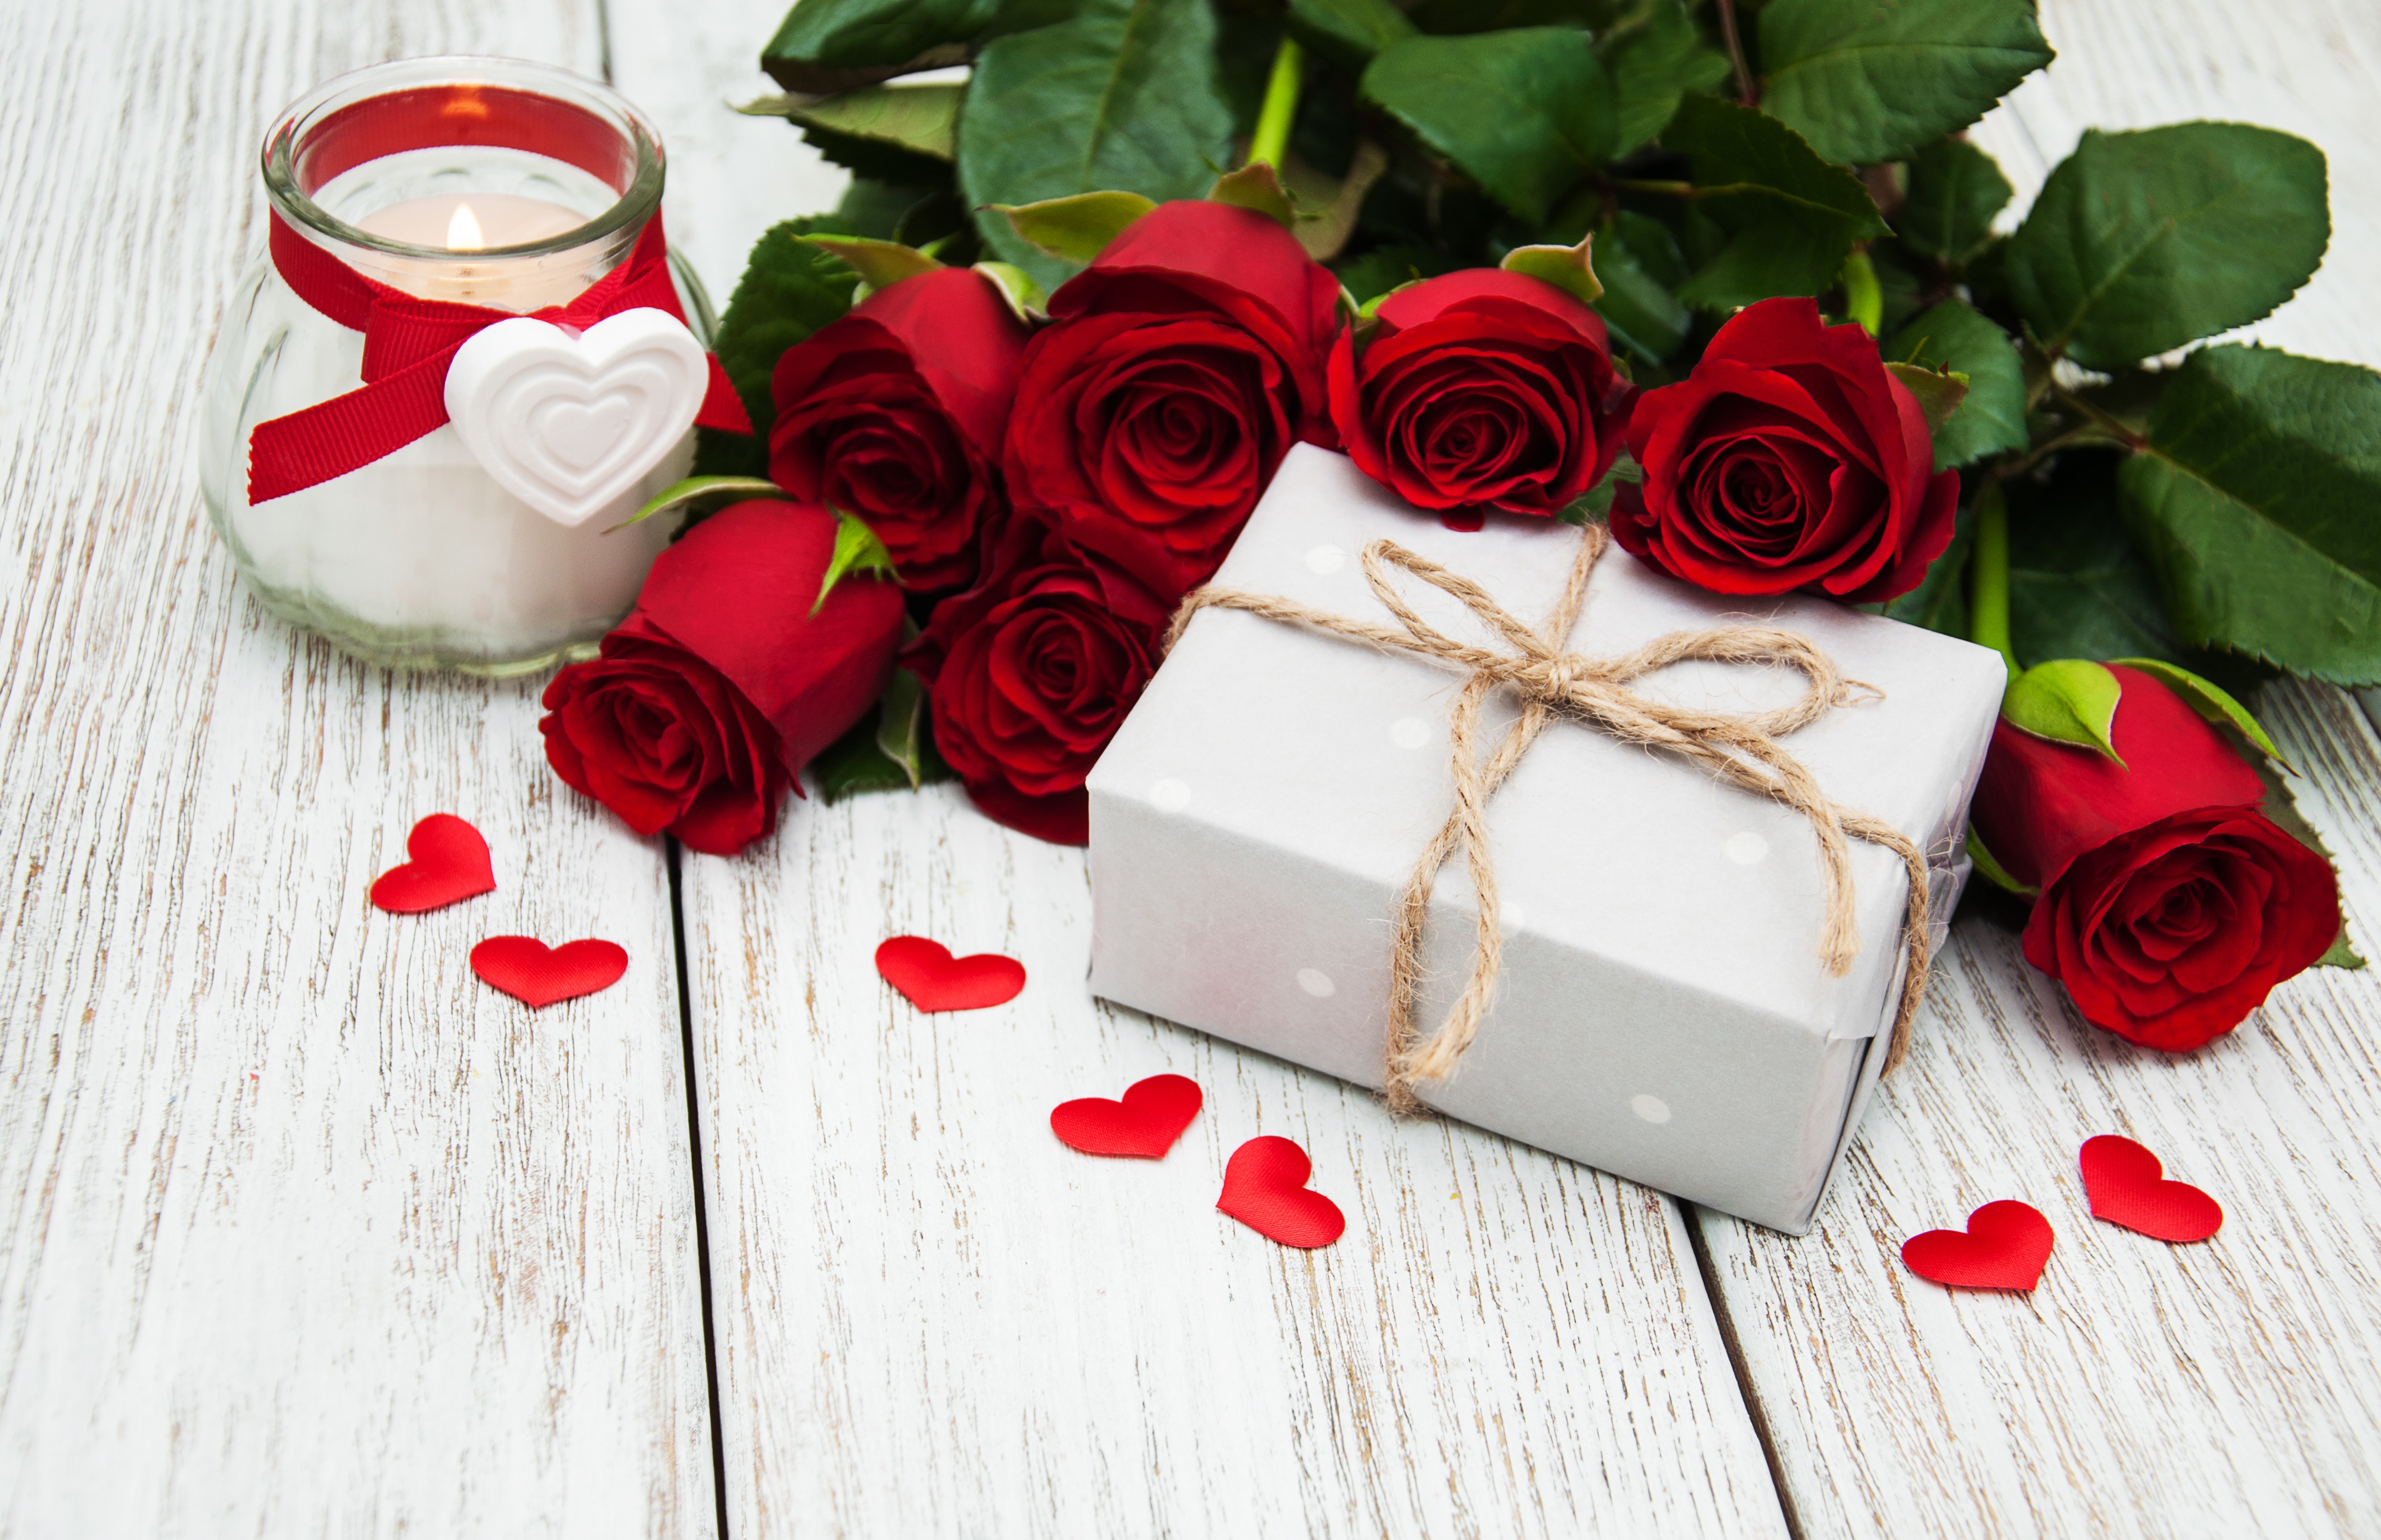 Saint Valentines Wallpaper Wooden Heart And Bunch Of Roses Surrounded By  Lights Romantic Love Background Concept Valentines Day Celebration Concept  Stock Photo - Download Image Now - iStock